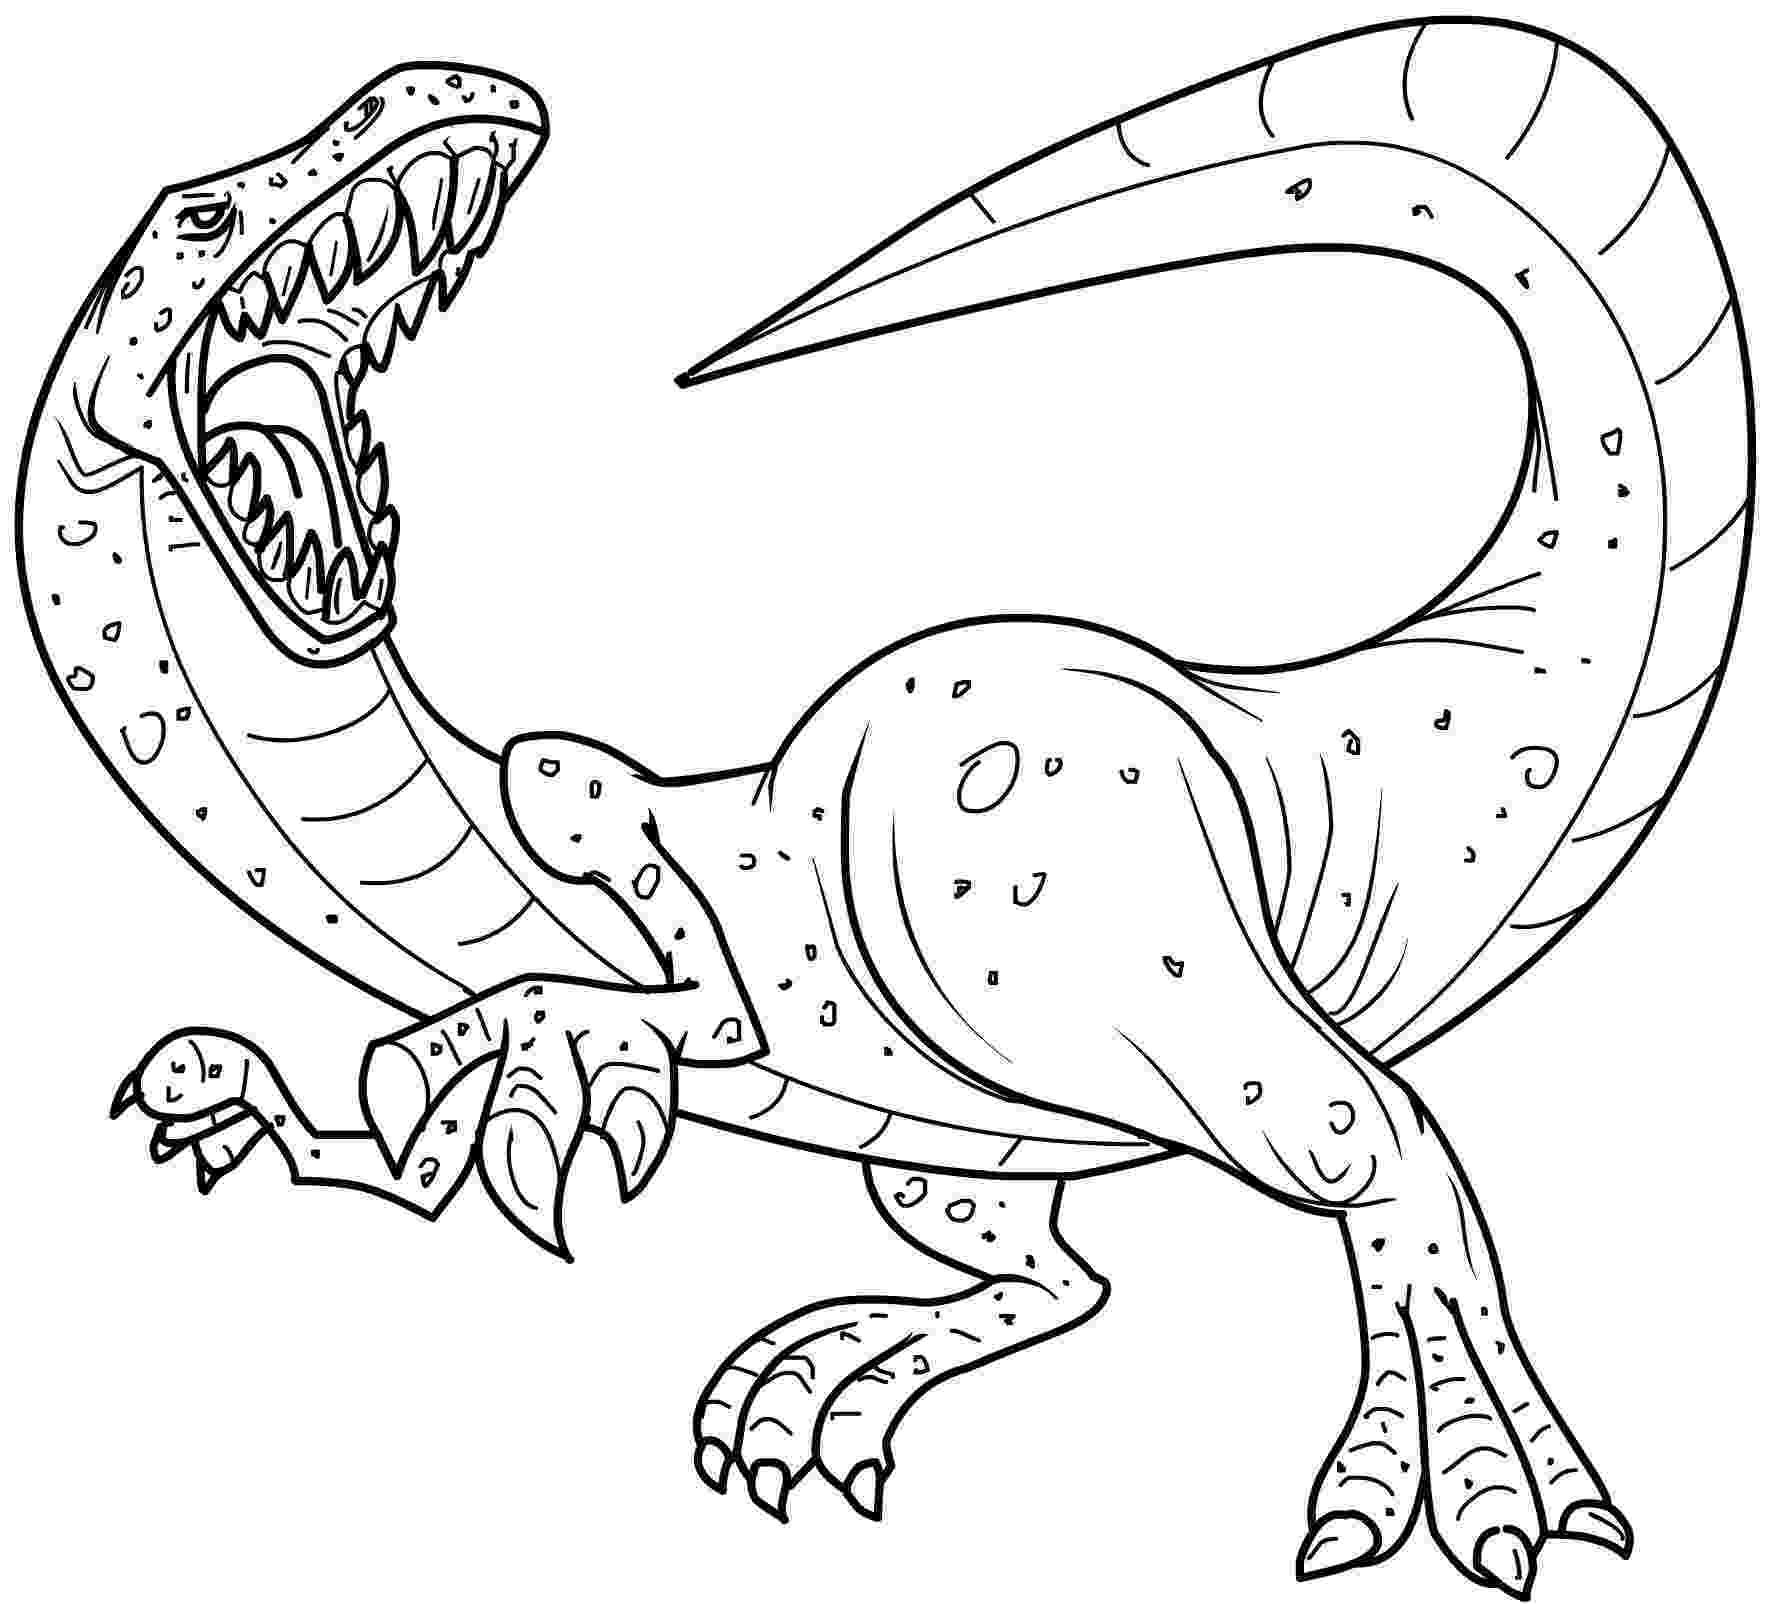 dinosaur color free printable dinosaur coloring pages for kids dinosaur color 